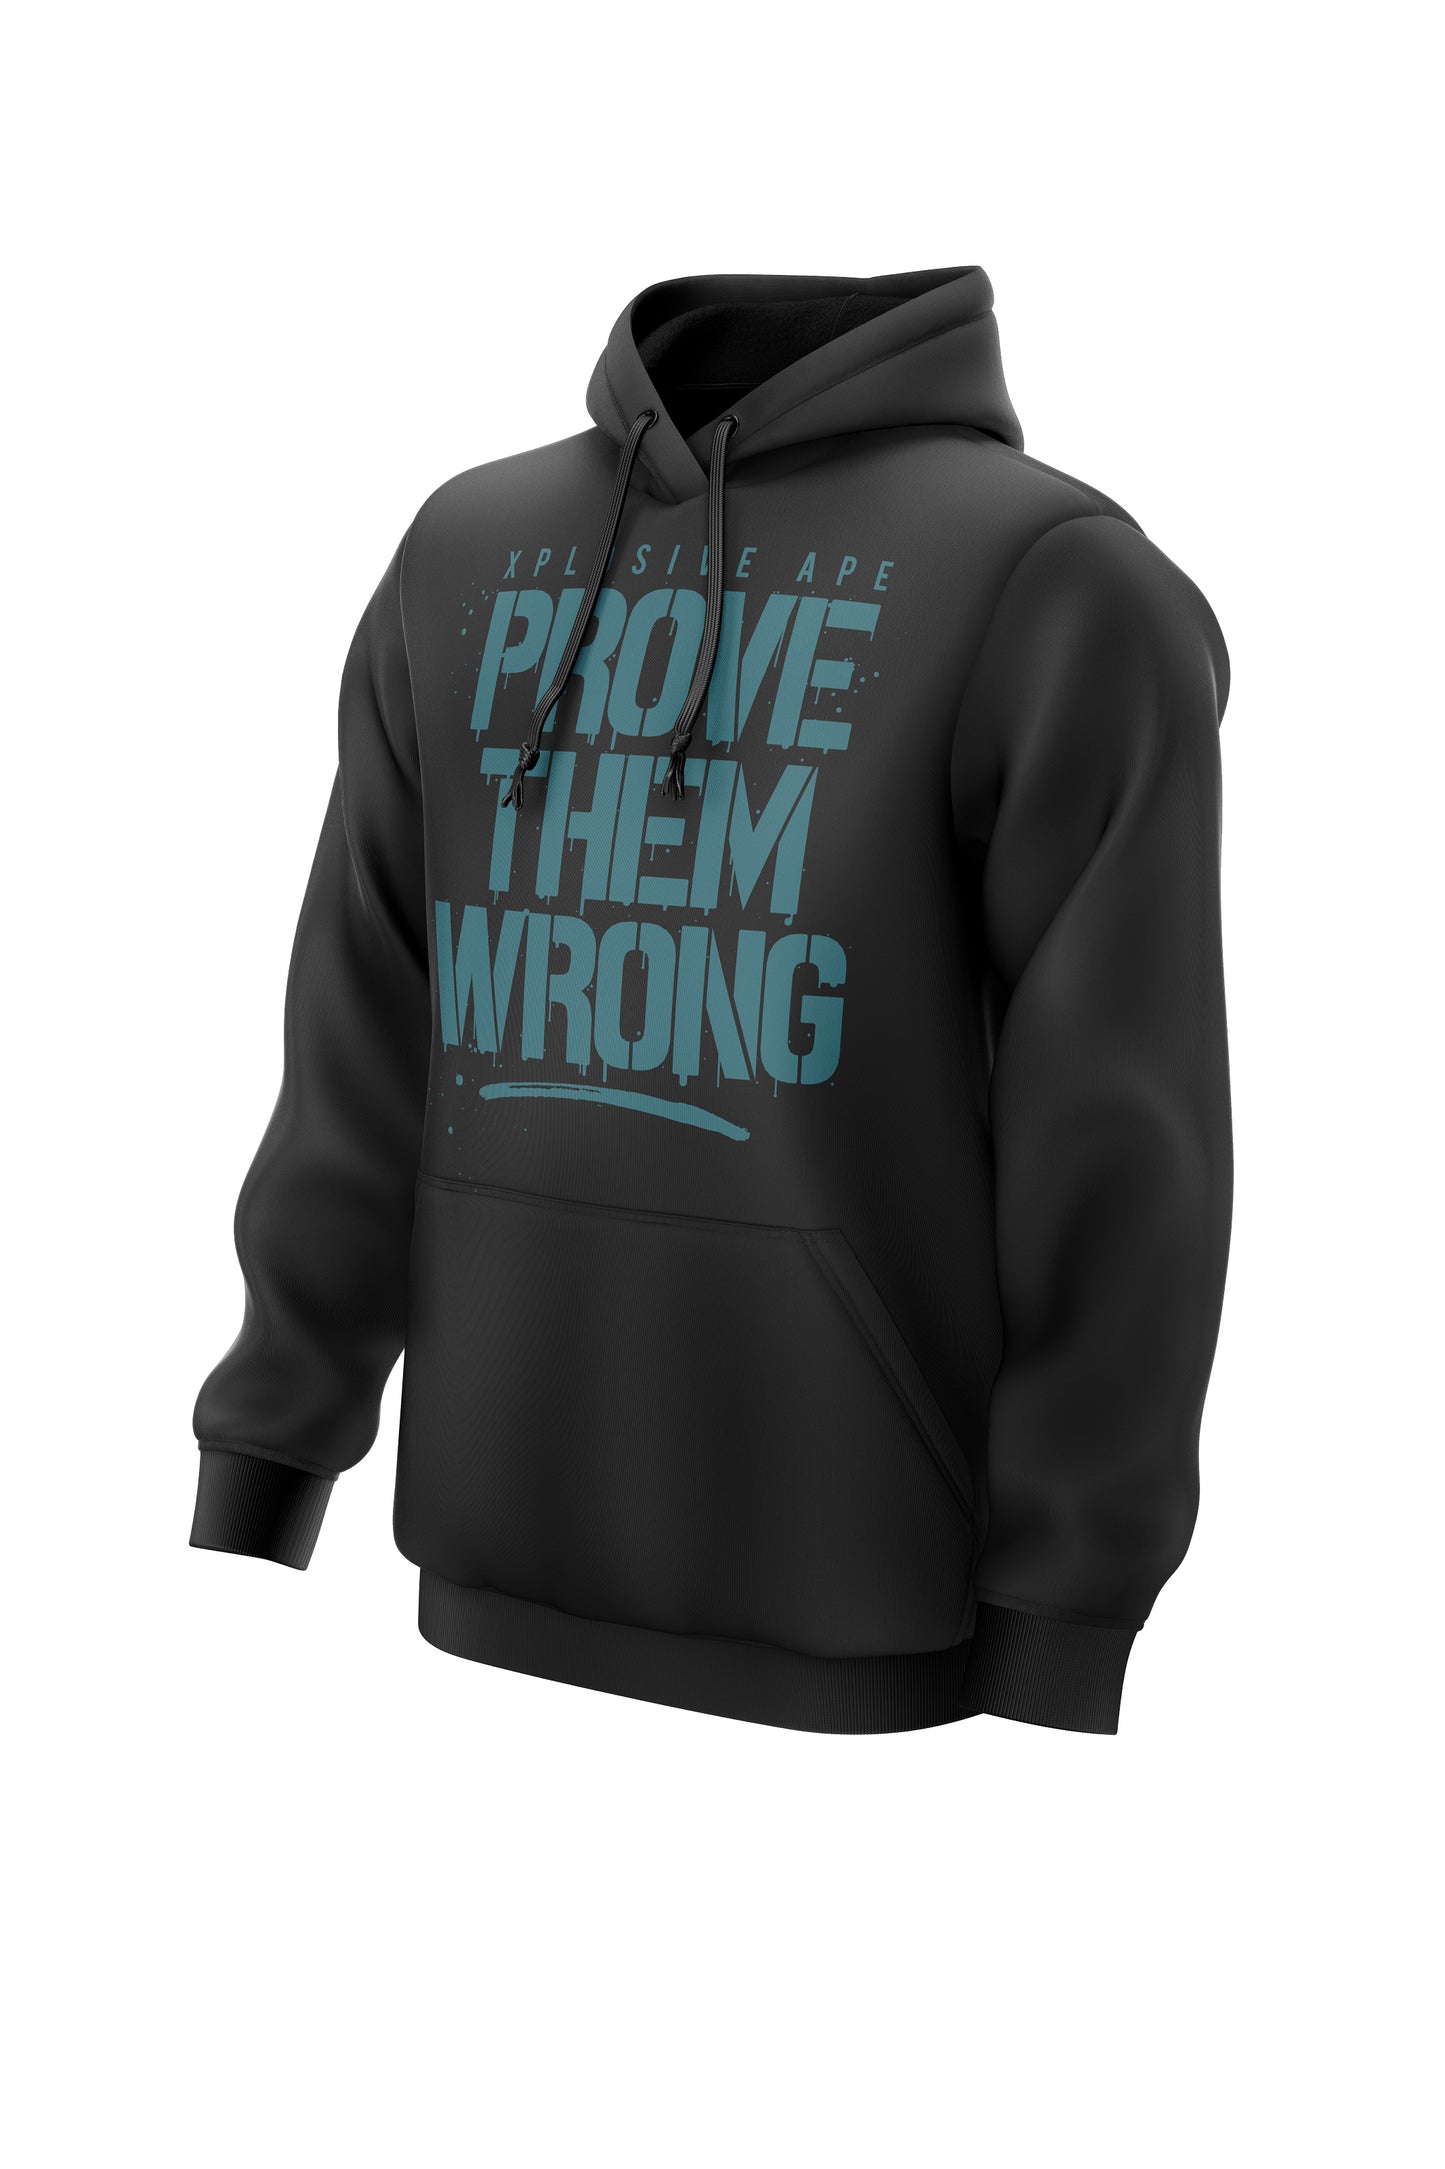 XAPE Prove Them Wrong Hoodie